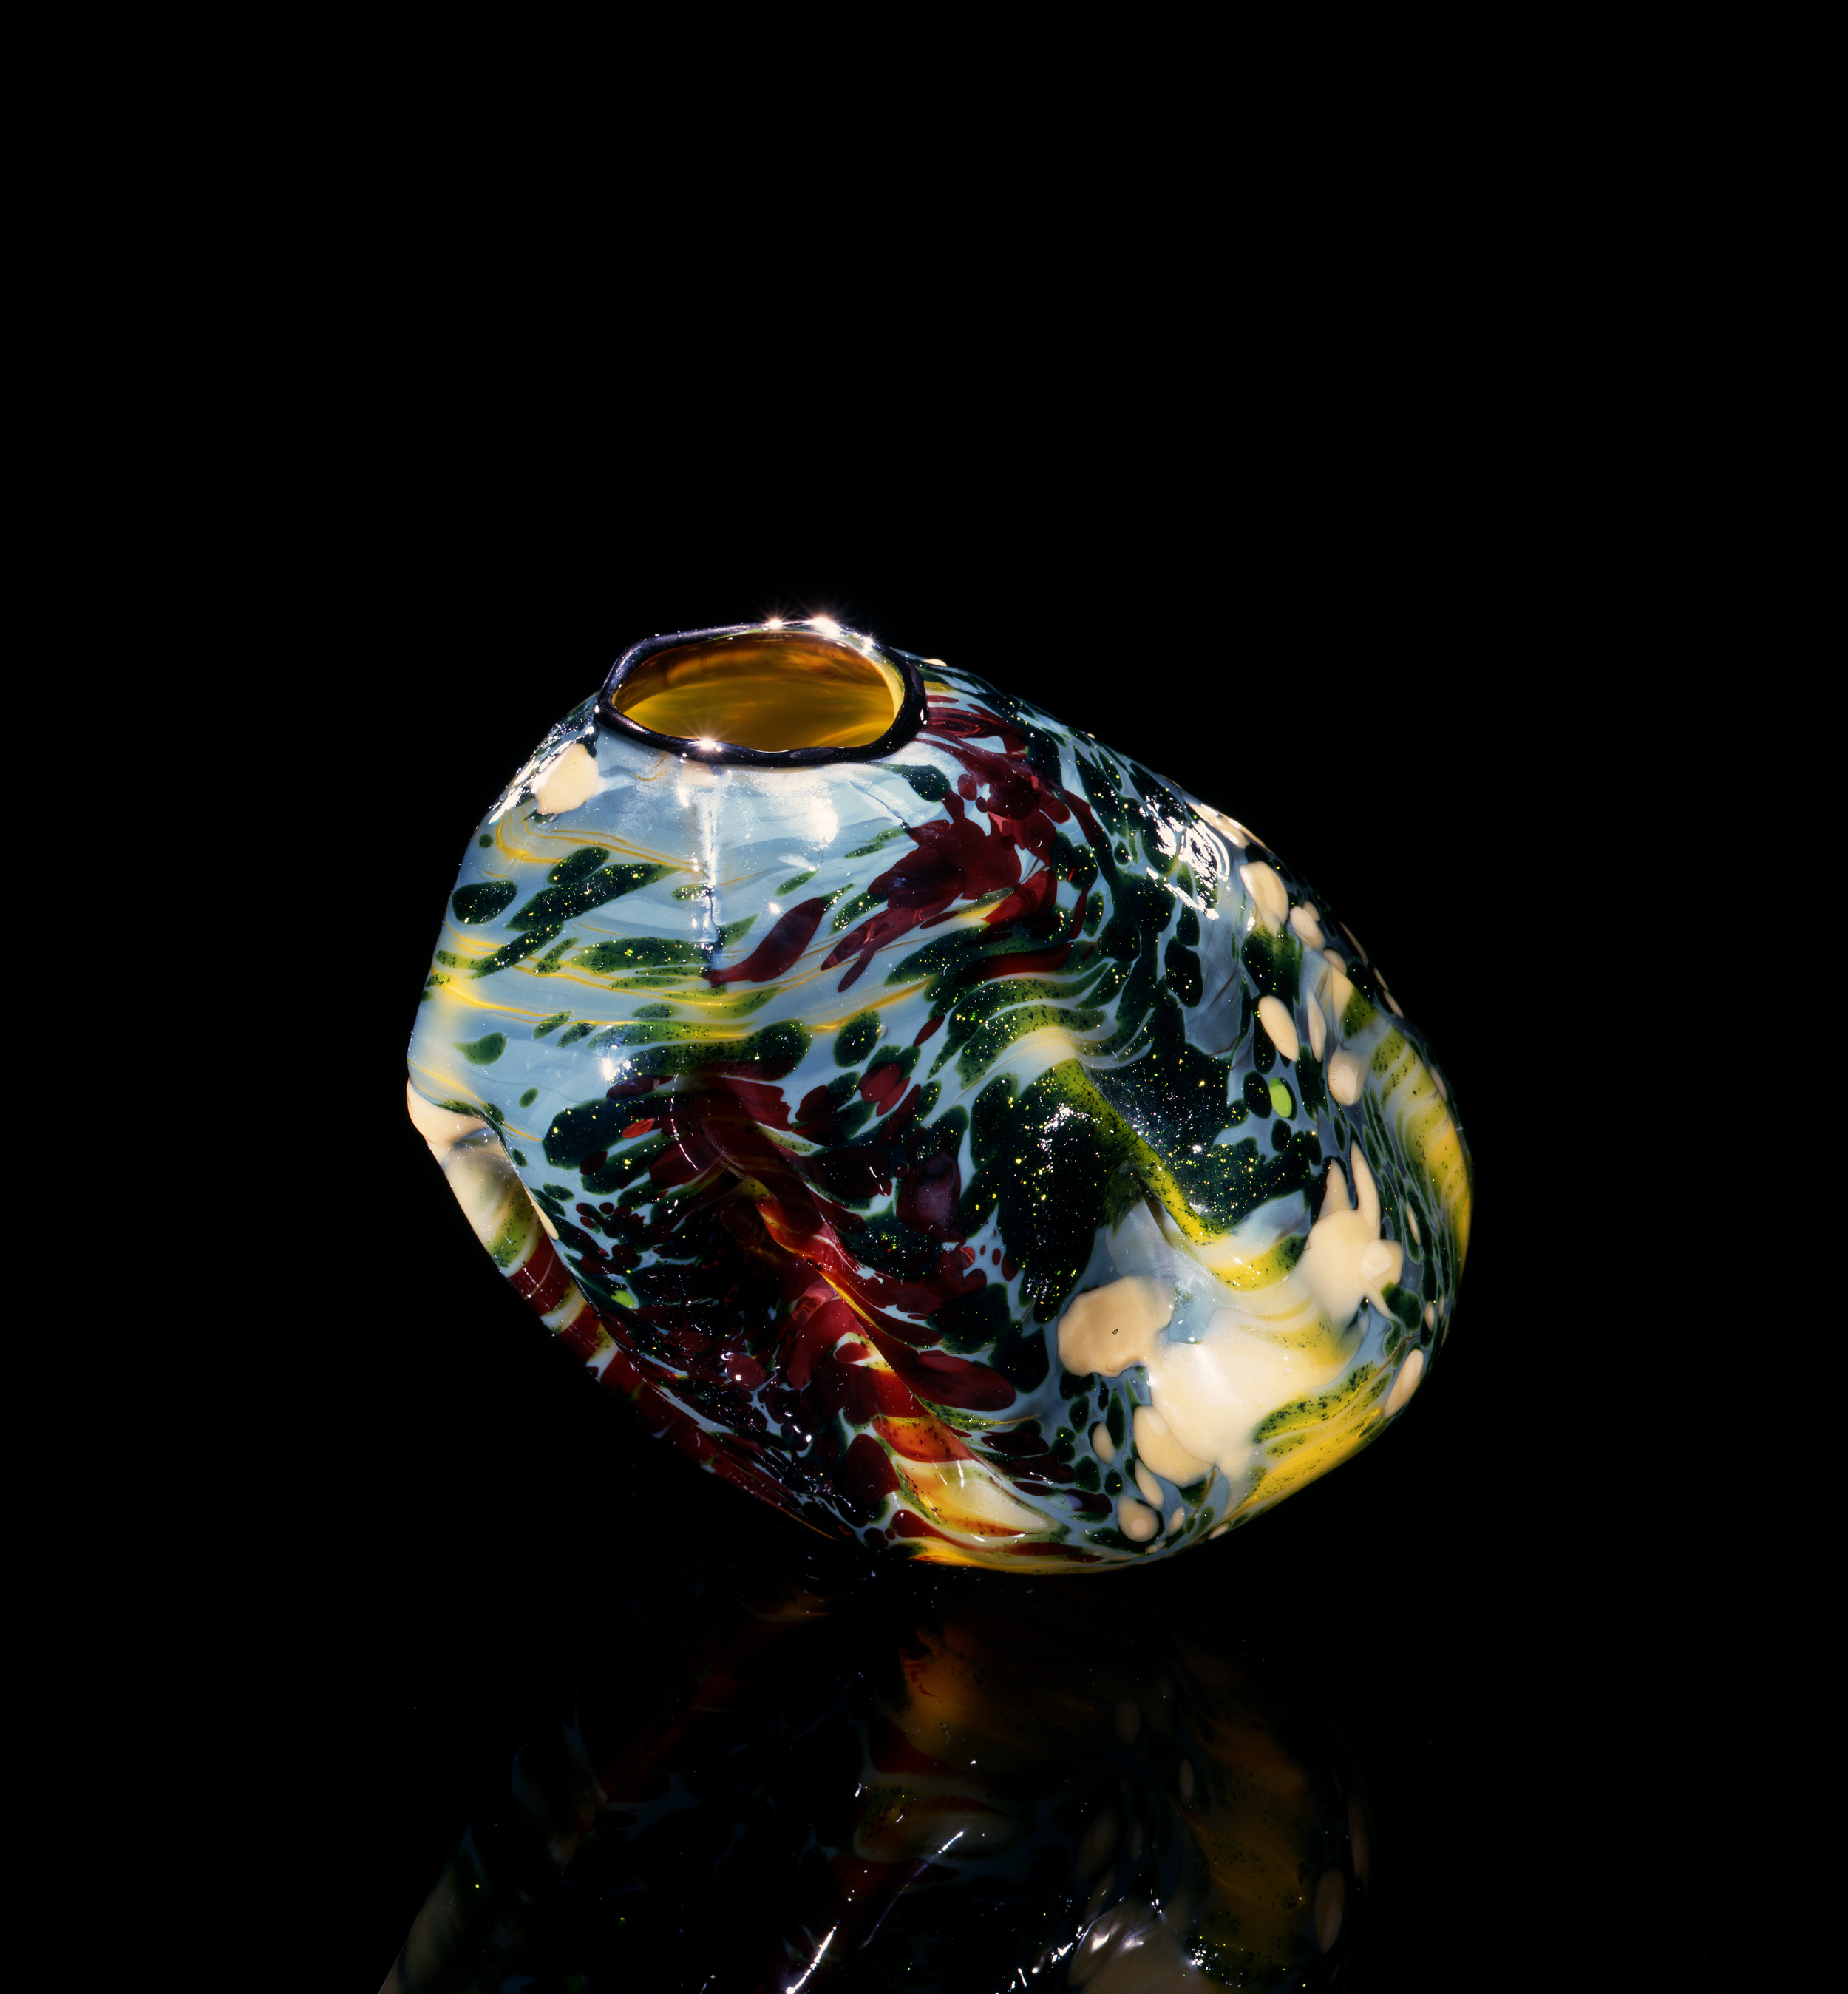  Dale Chihuly,&nbsp; Red and Green Dappled Daffodil Macchia with Orion Blue&nbsp;Lip Wrap&nbsp; (1981, glass, 6 x 7 x 6&nbsp;inches), DC.58 